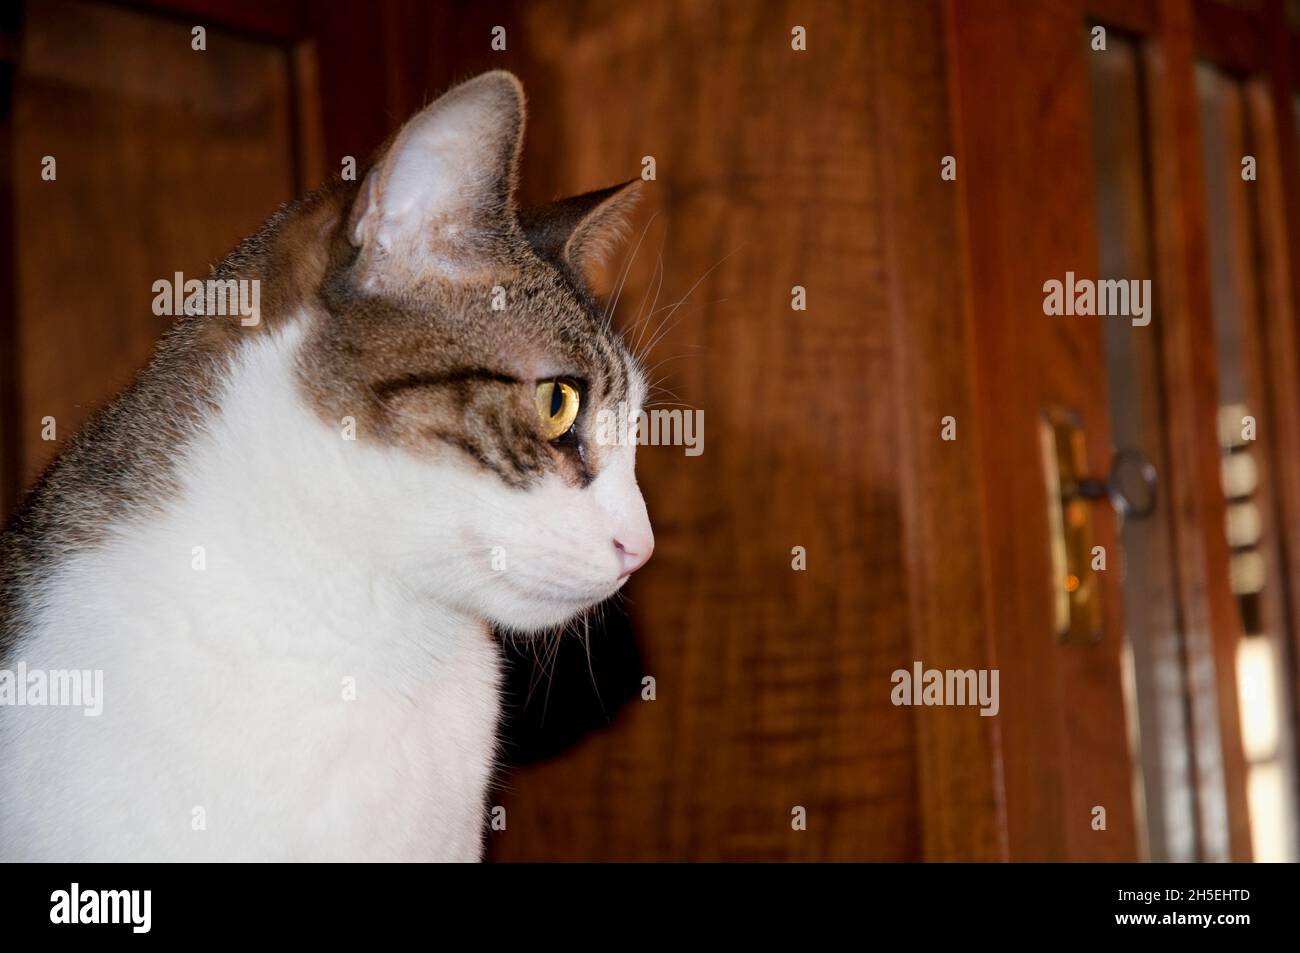 Profile portrait of tabby and white cat. Stock Photo